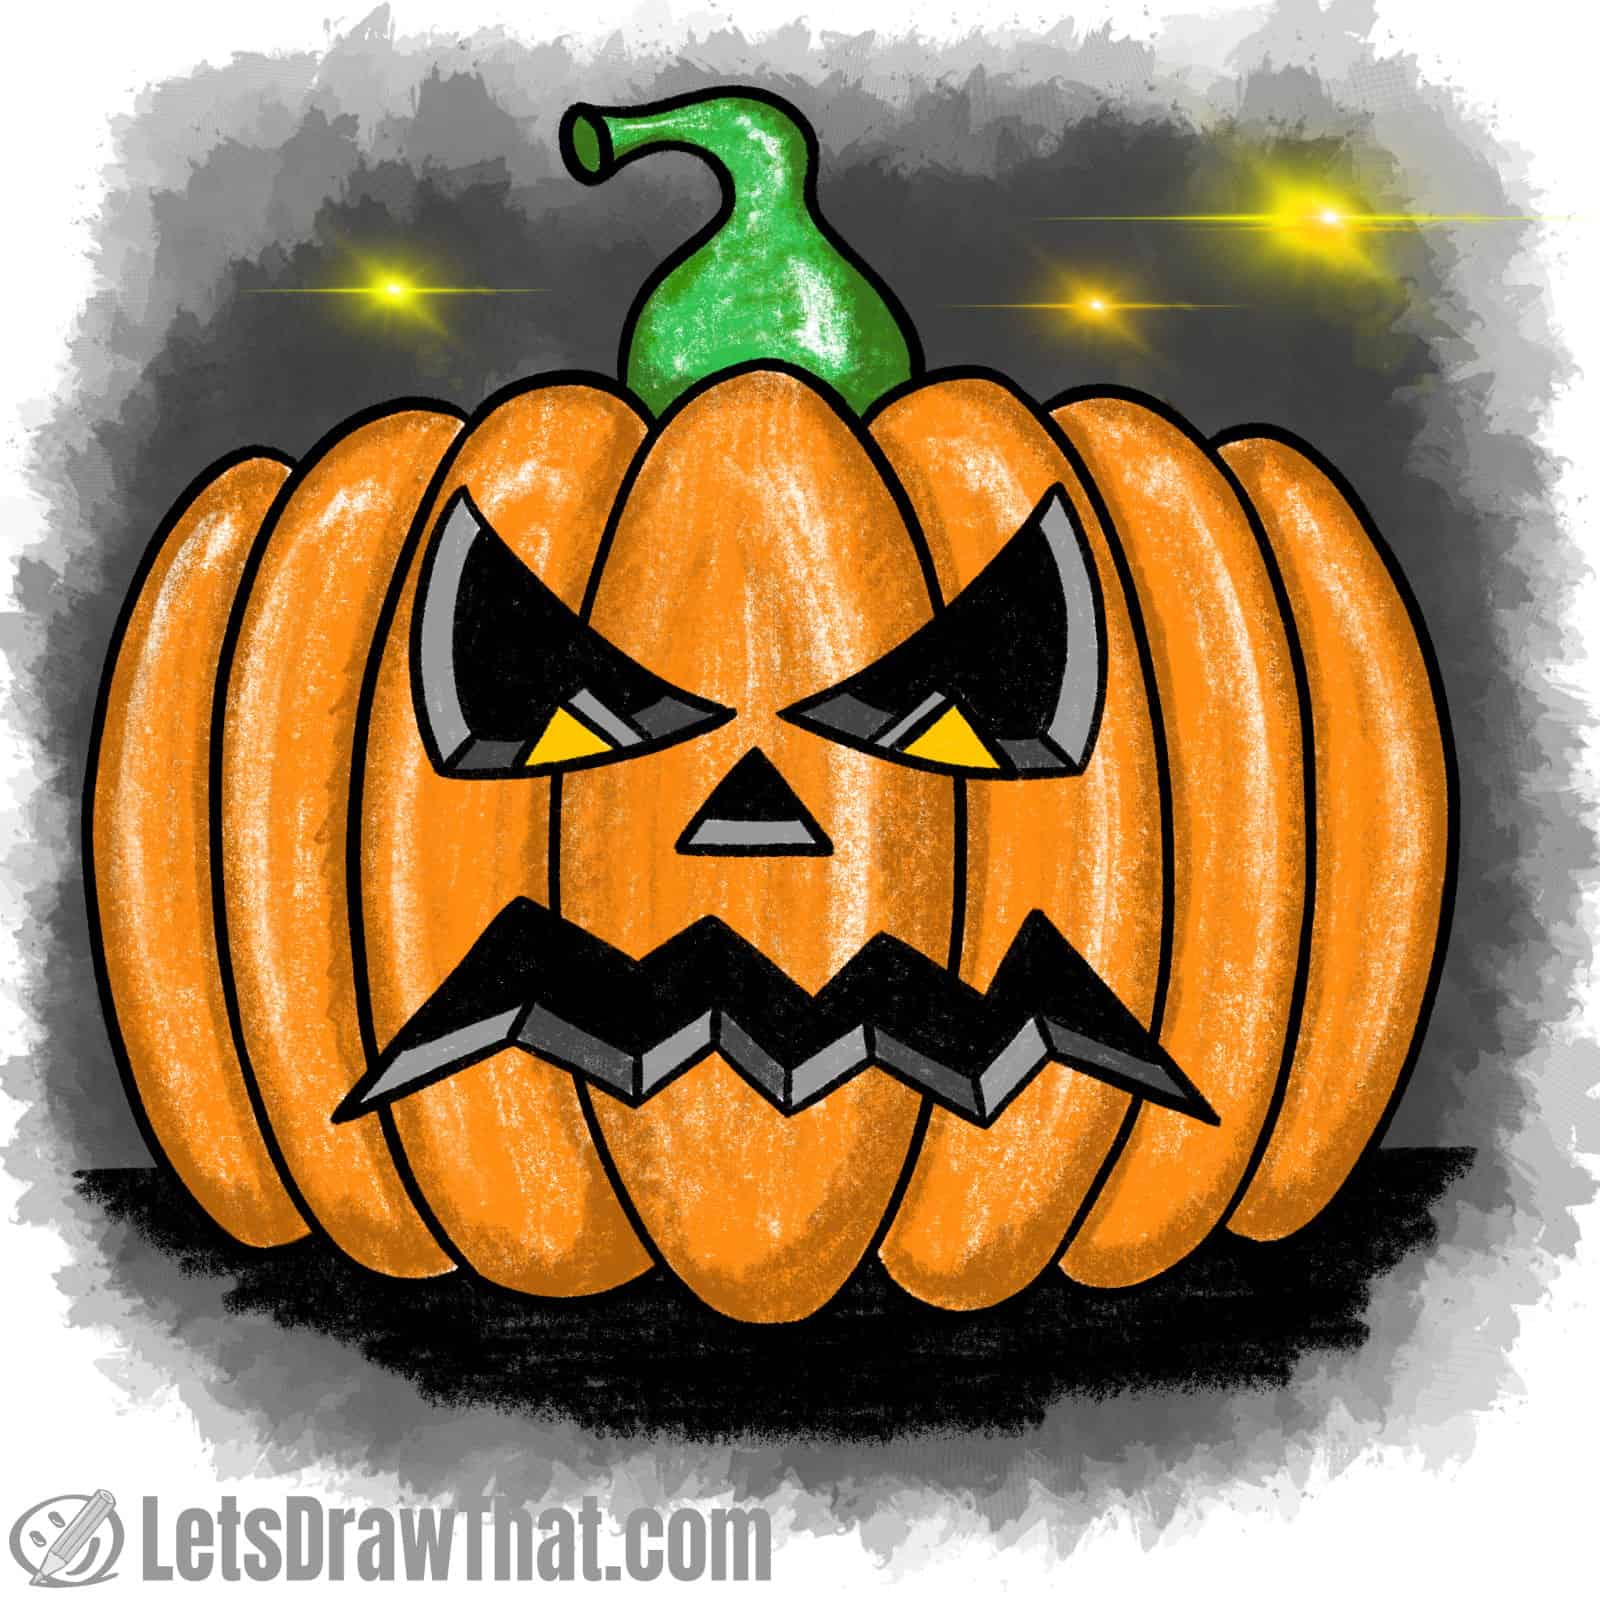 Drawing pumpkin faces:  angry pumpkin face drawing coloured-in